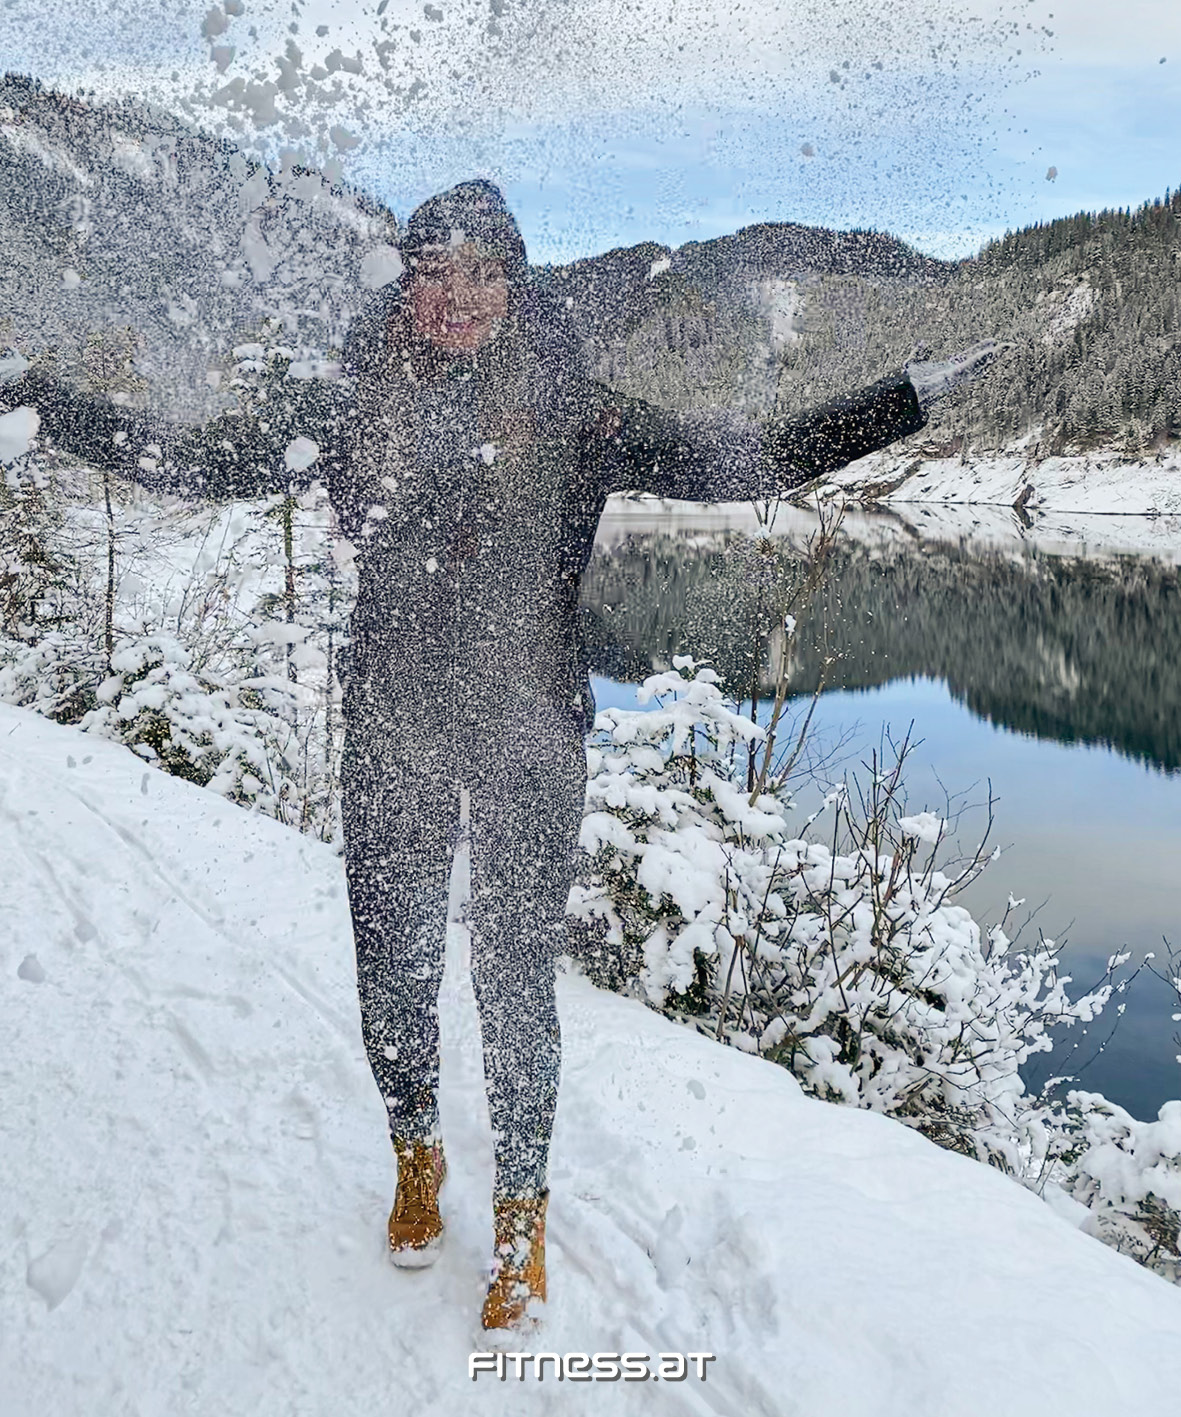 When you focus on the good, the good gets better ✨

📷 @_danifee_
📍Gosausee

#fitnessat #weilwirfitnessleben #feelit #outdoor #fun #feelfree #view #beautiful #walk #moment #austria #moments #motivation #sport #fitness #stayfit #feelgood #youcan #bestrong #strong